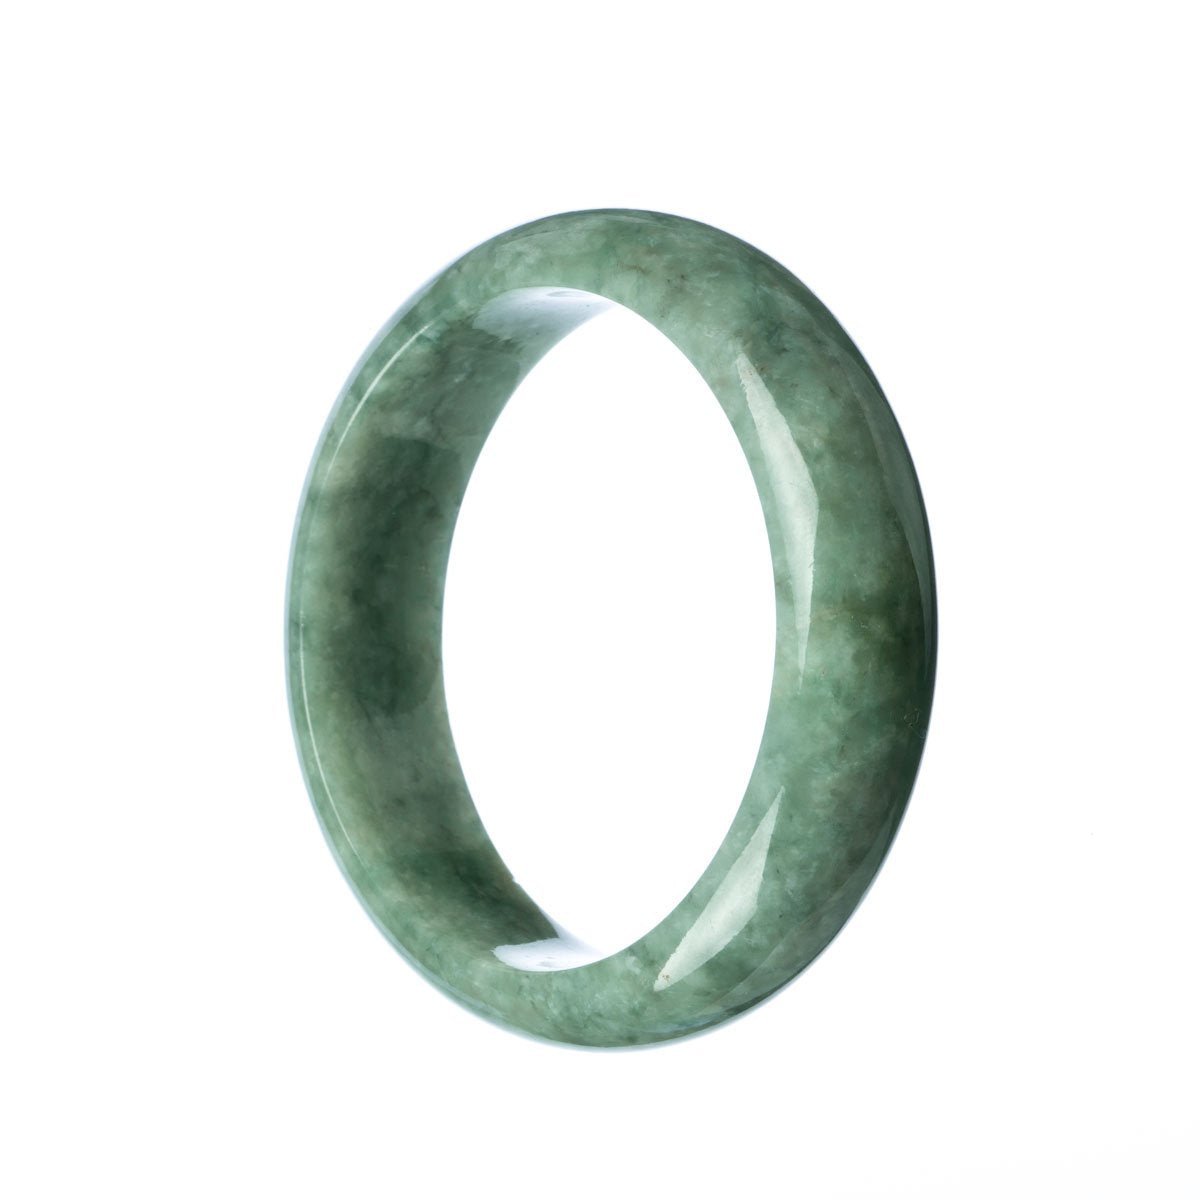 Image of a Real Grade A Green Burmese Jade Bangle with a 59mm circumference, featuring a unique Half Moon design. Exquisite craftsmanship by MAYS.